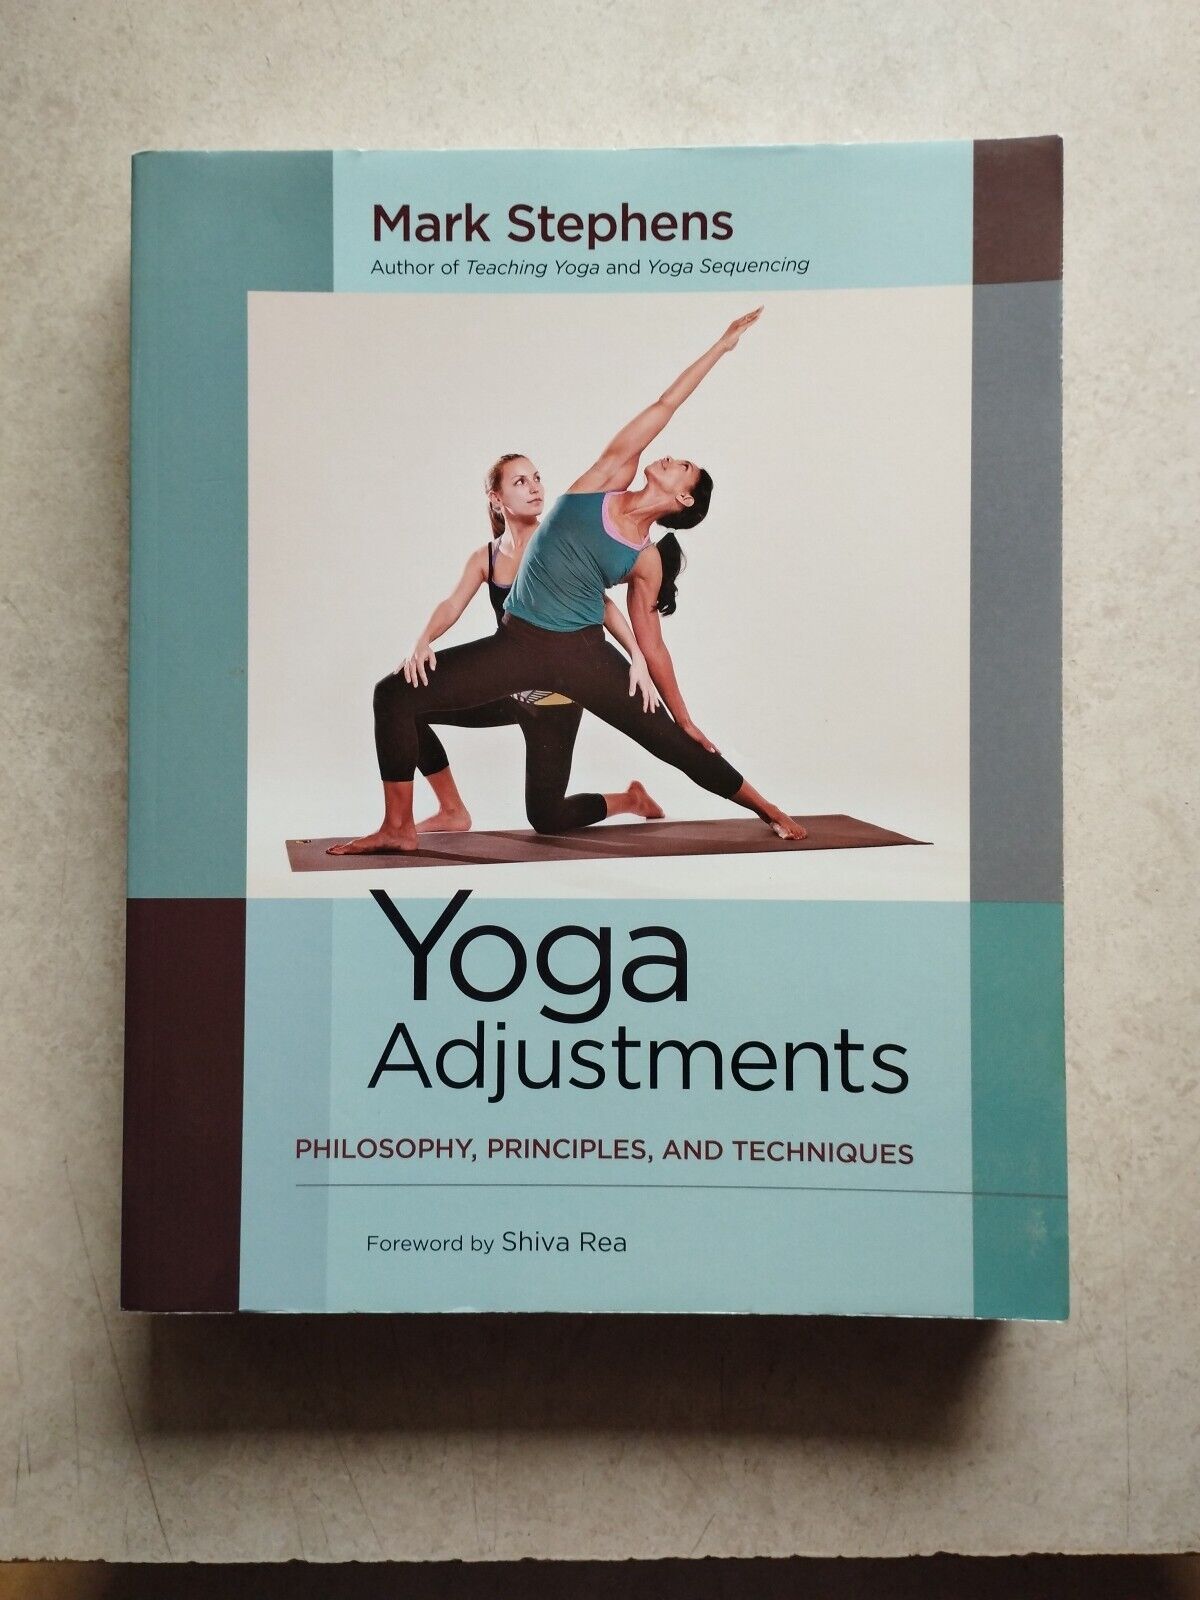 Yoga Adjustments: Philosophy, Principles, and Techniques by Mark